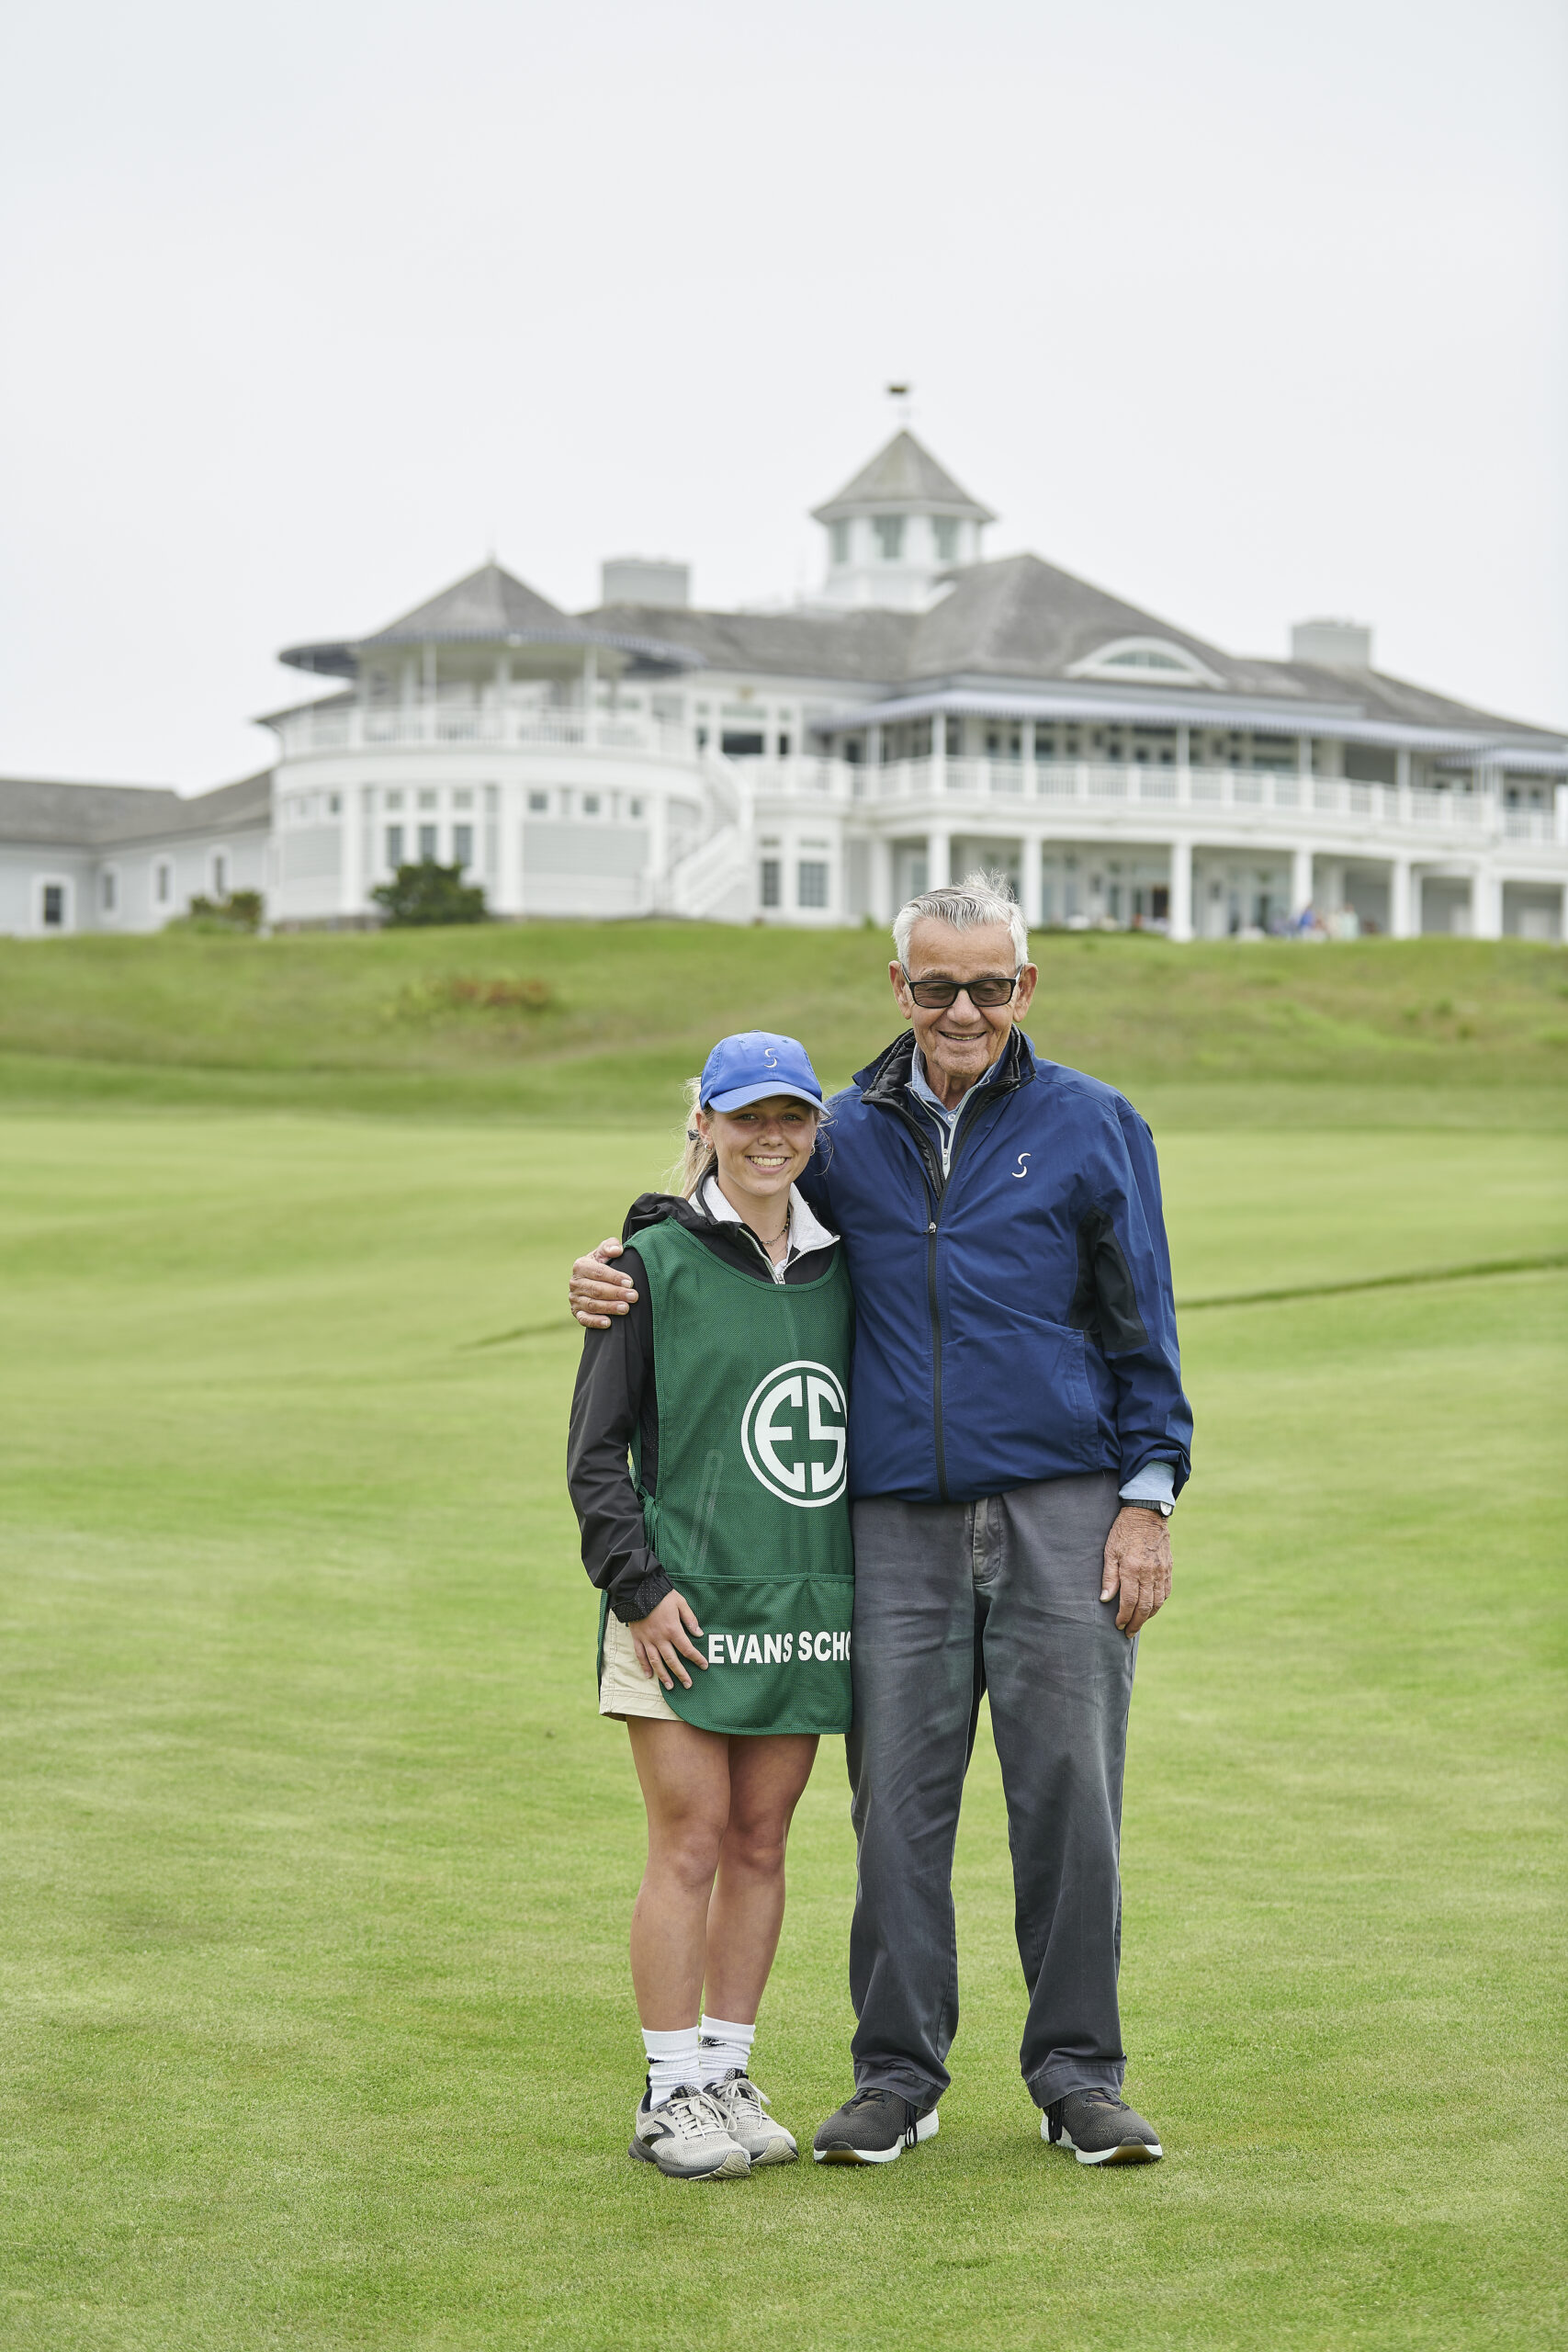 Abbey Sisler, a Wading River resident, with Sebonack Golf Club owner Michael Pascucci. Sisler will attend the University of Maryland on a full ride courtesy of the Chick Evans Scholarship, which she earned through her work as a caddy at Sebonack over the last three years. TODOR TSVETKOV PHOTOS